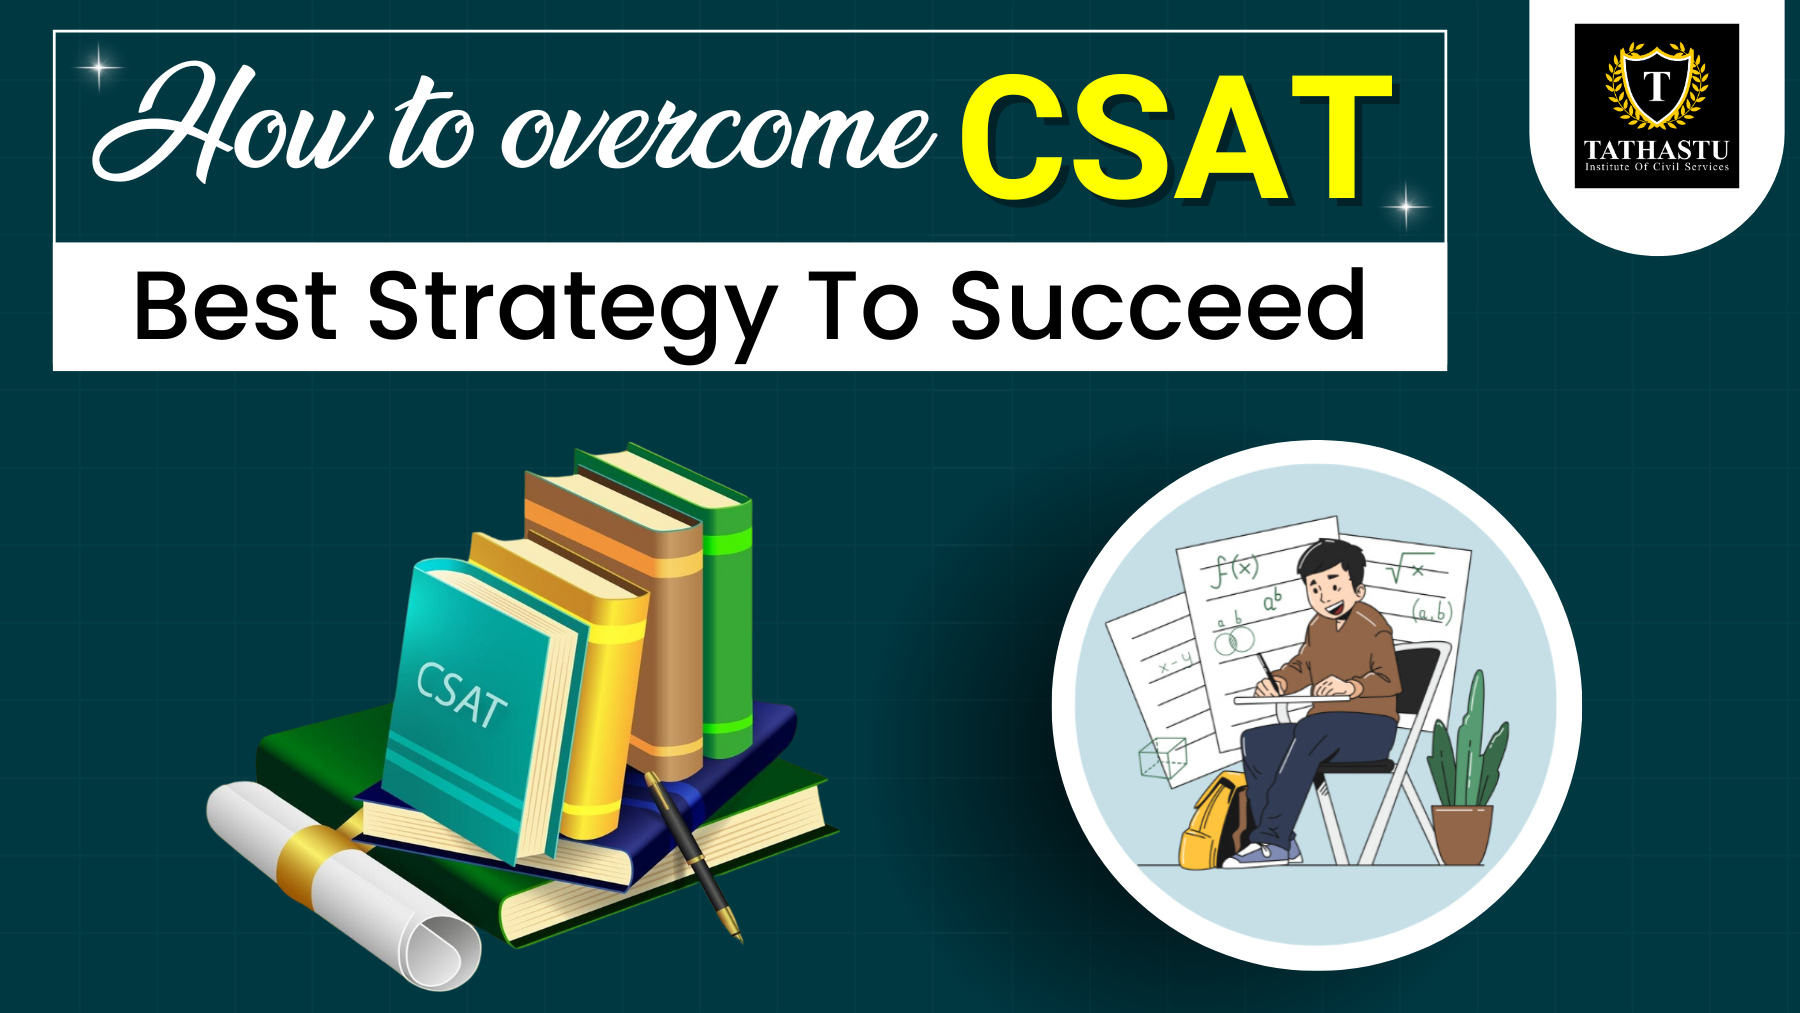 How To Overcome CSAT - Best Strategy To Succeed